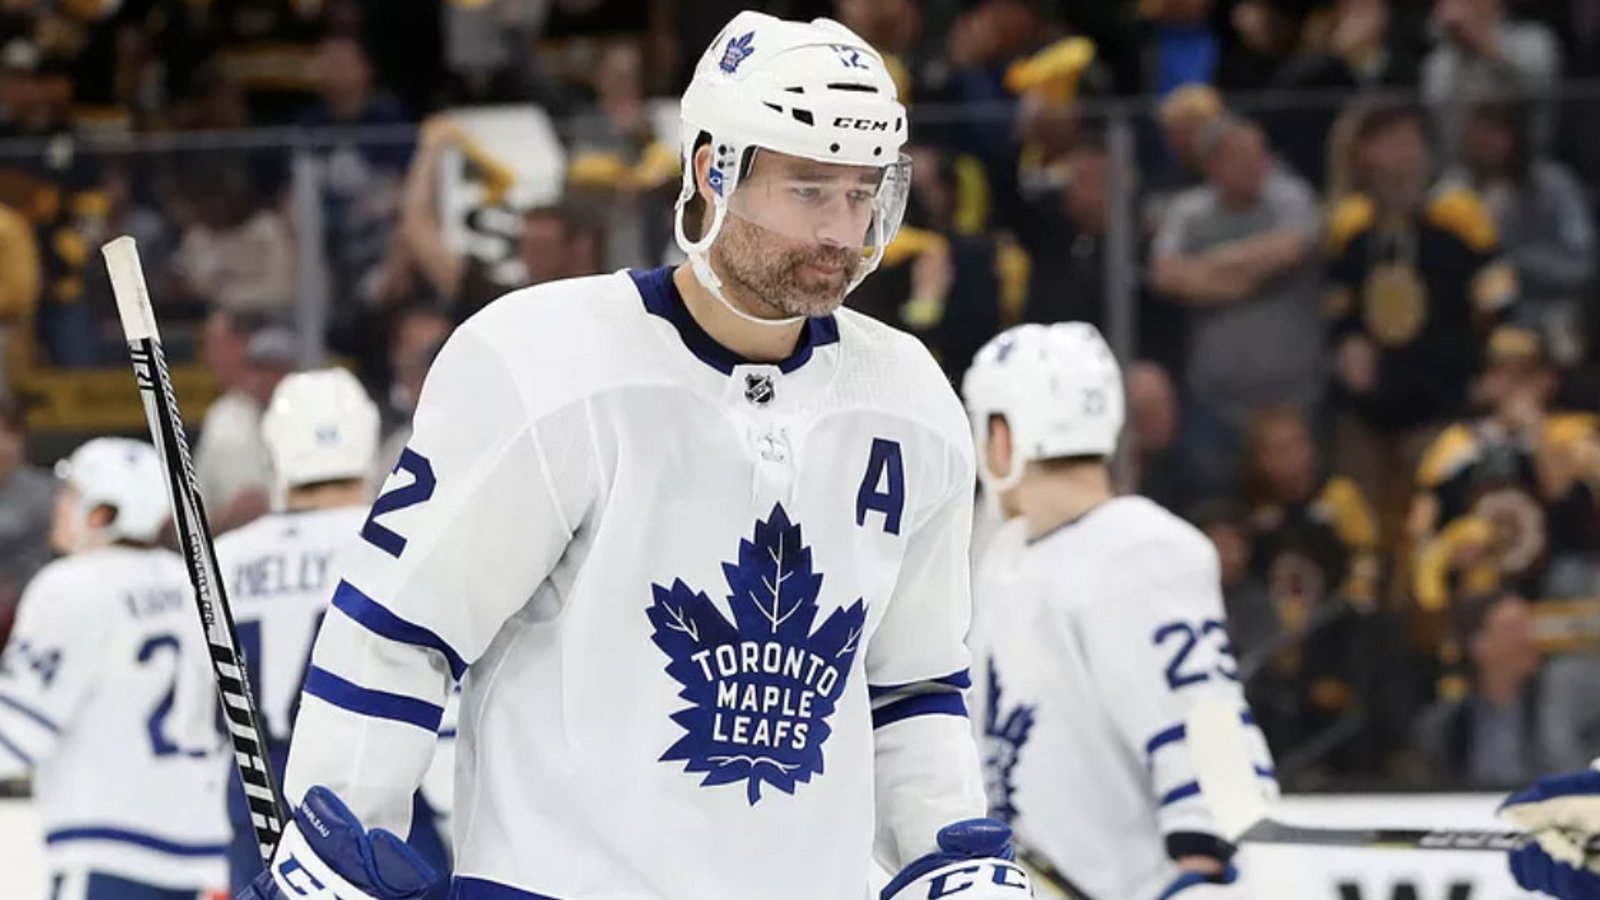 Marleau wants to be traded to new destination after failed trade with Kings 